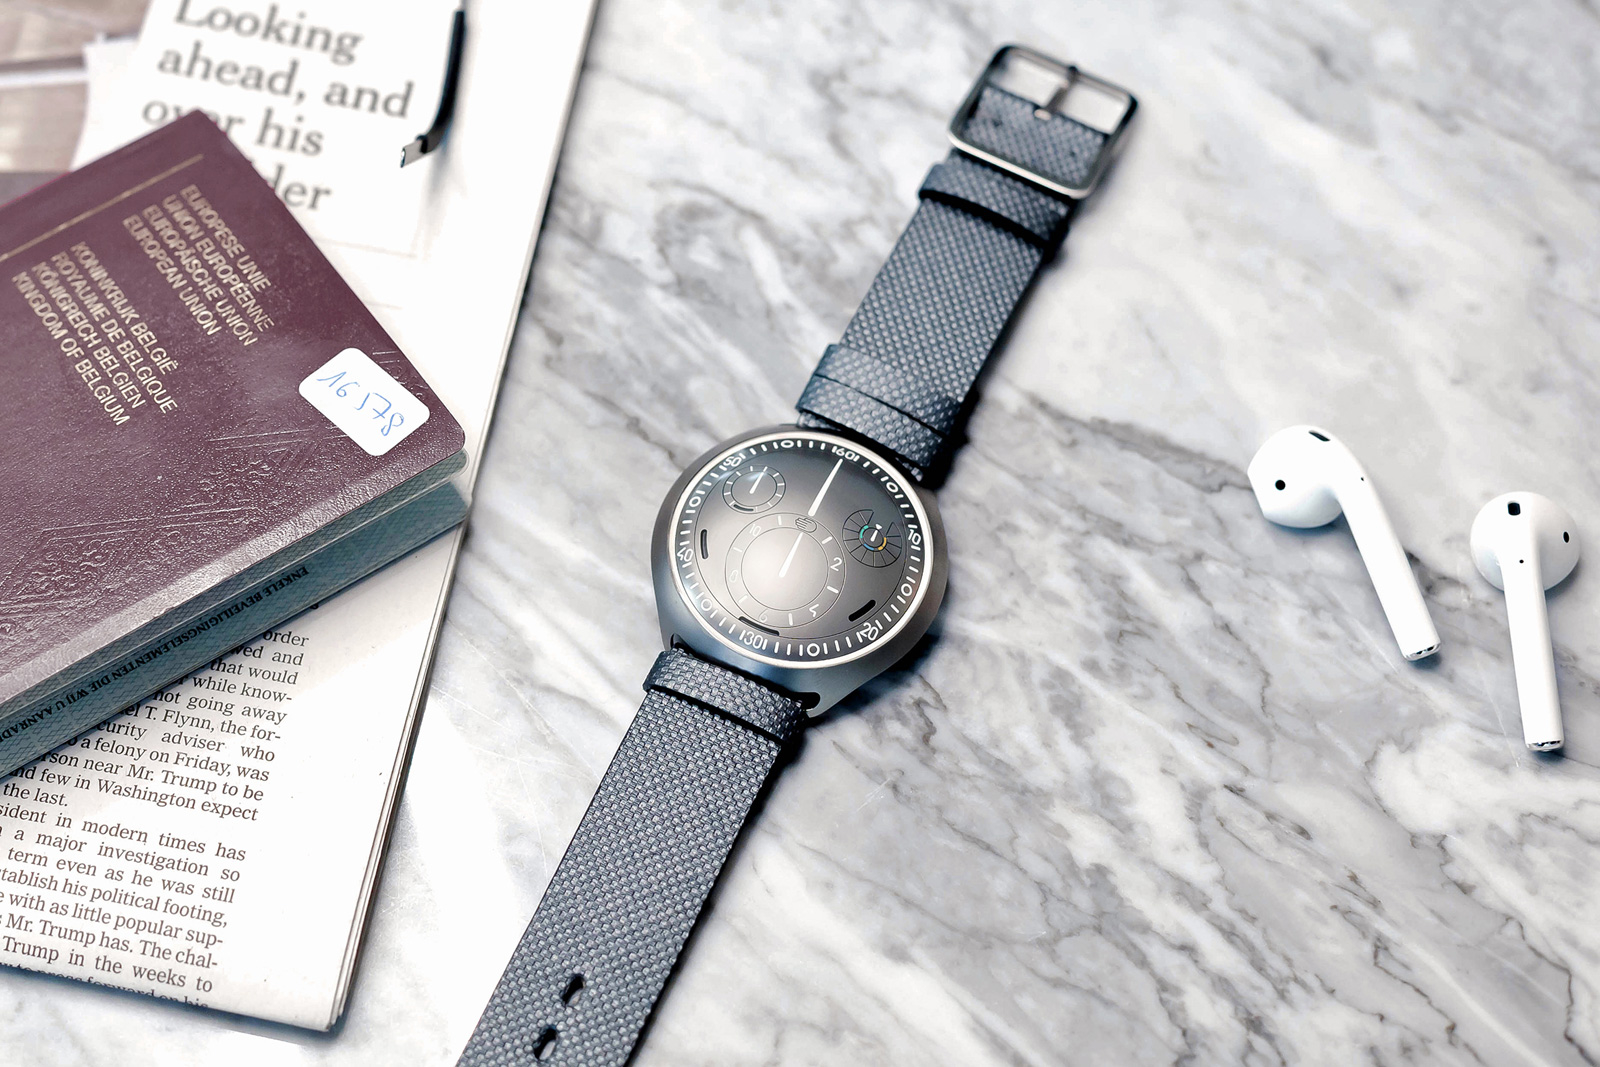 Ressence made a mechanical watch that pairs with your smartphone